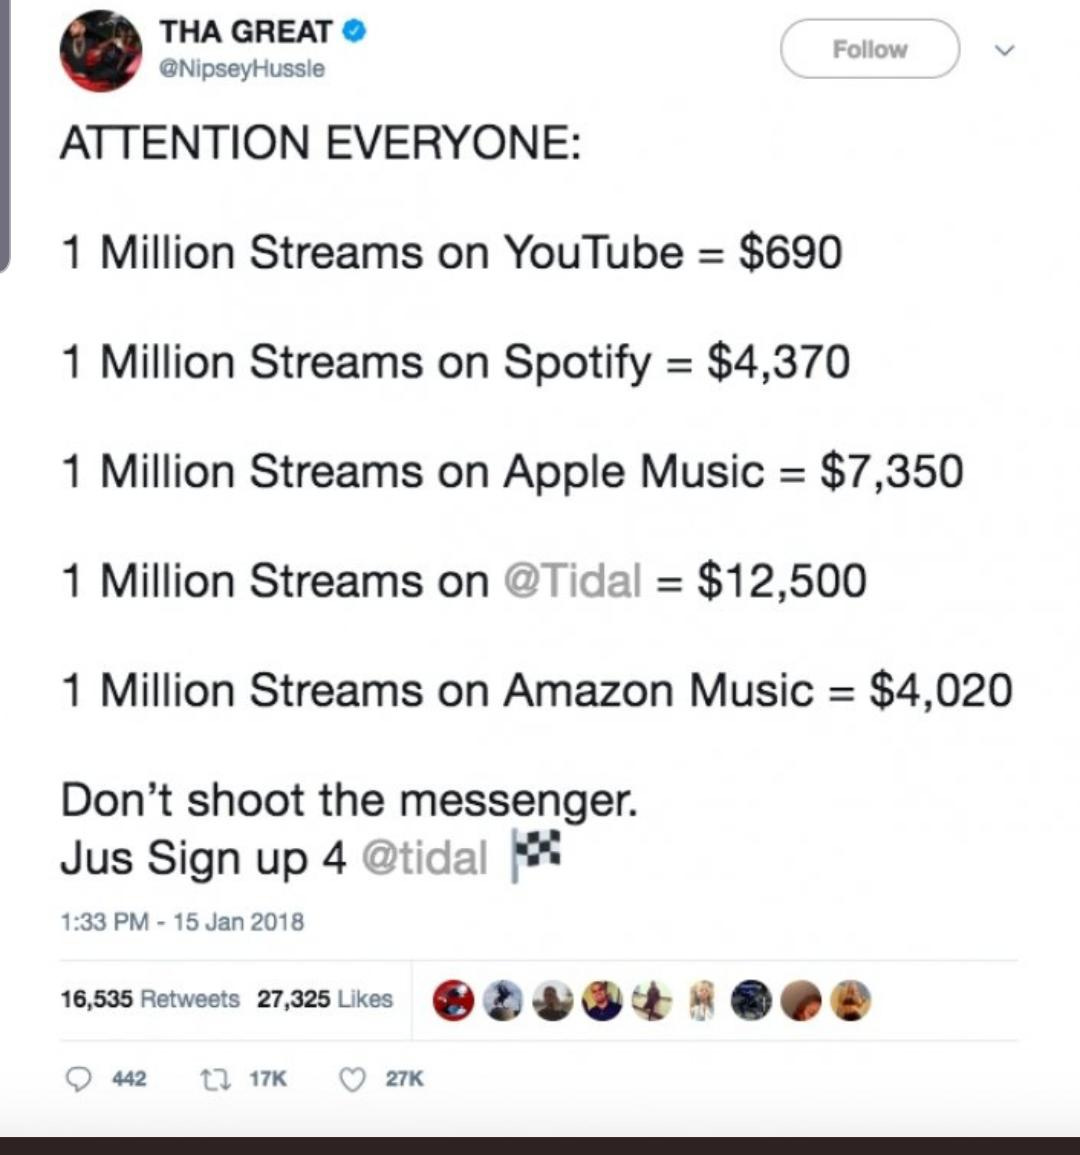 The Streaming Price Bible – Spotify,  and What 1 Million